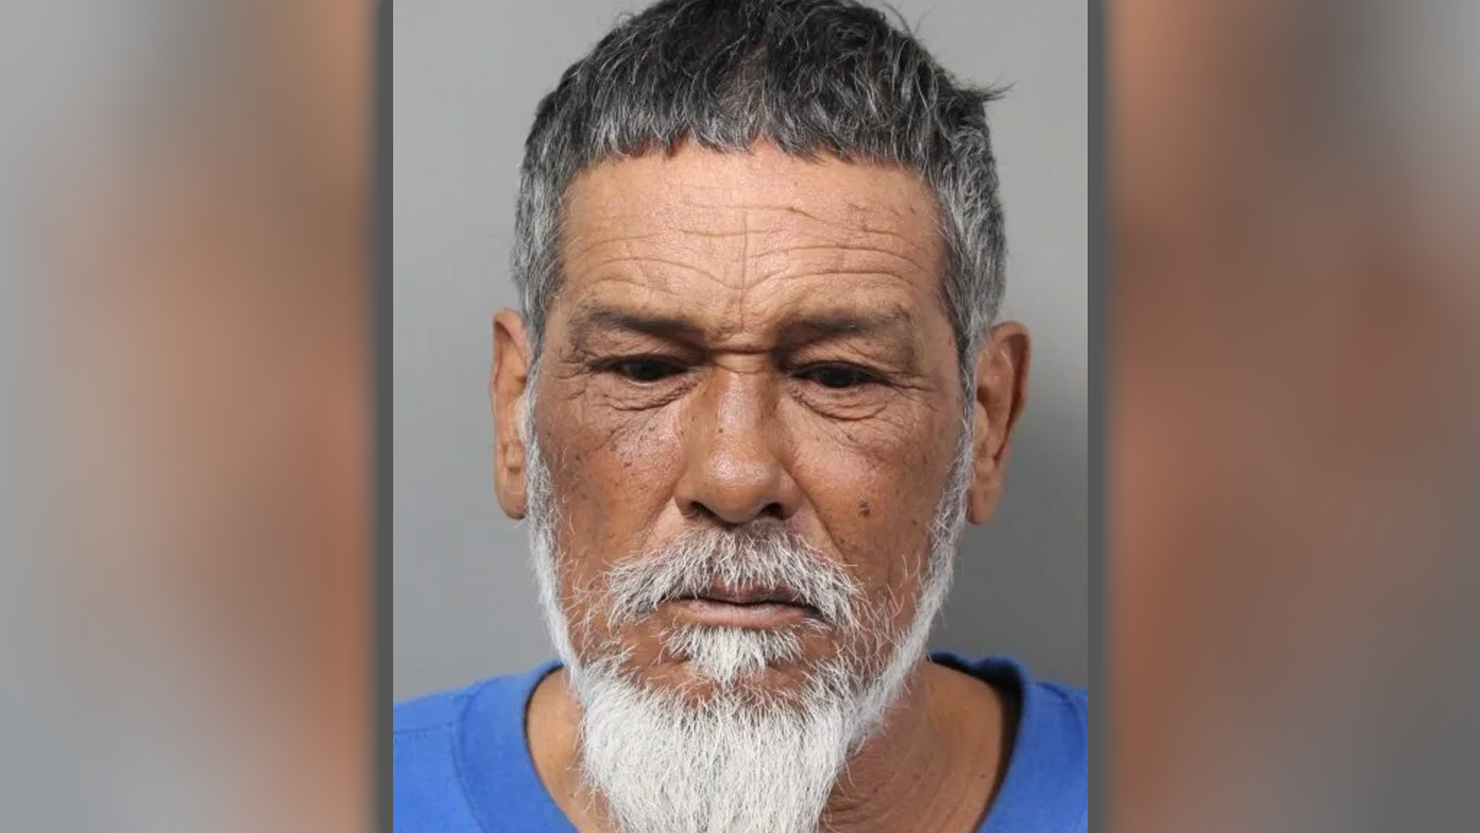 escaped inmate found more than 40 years later